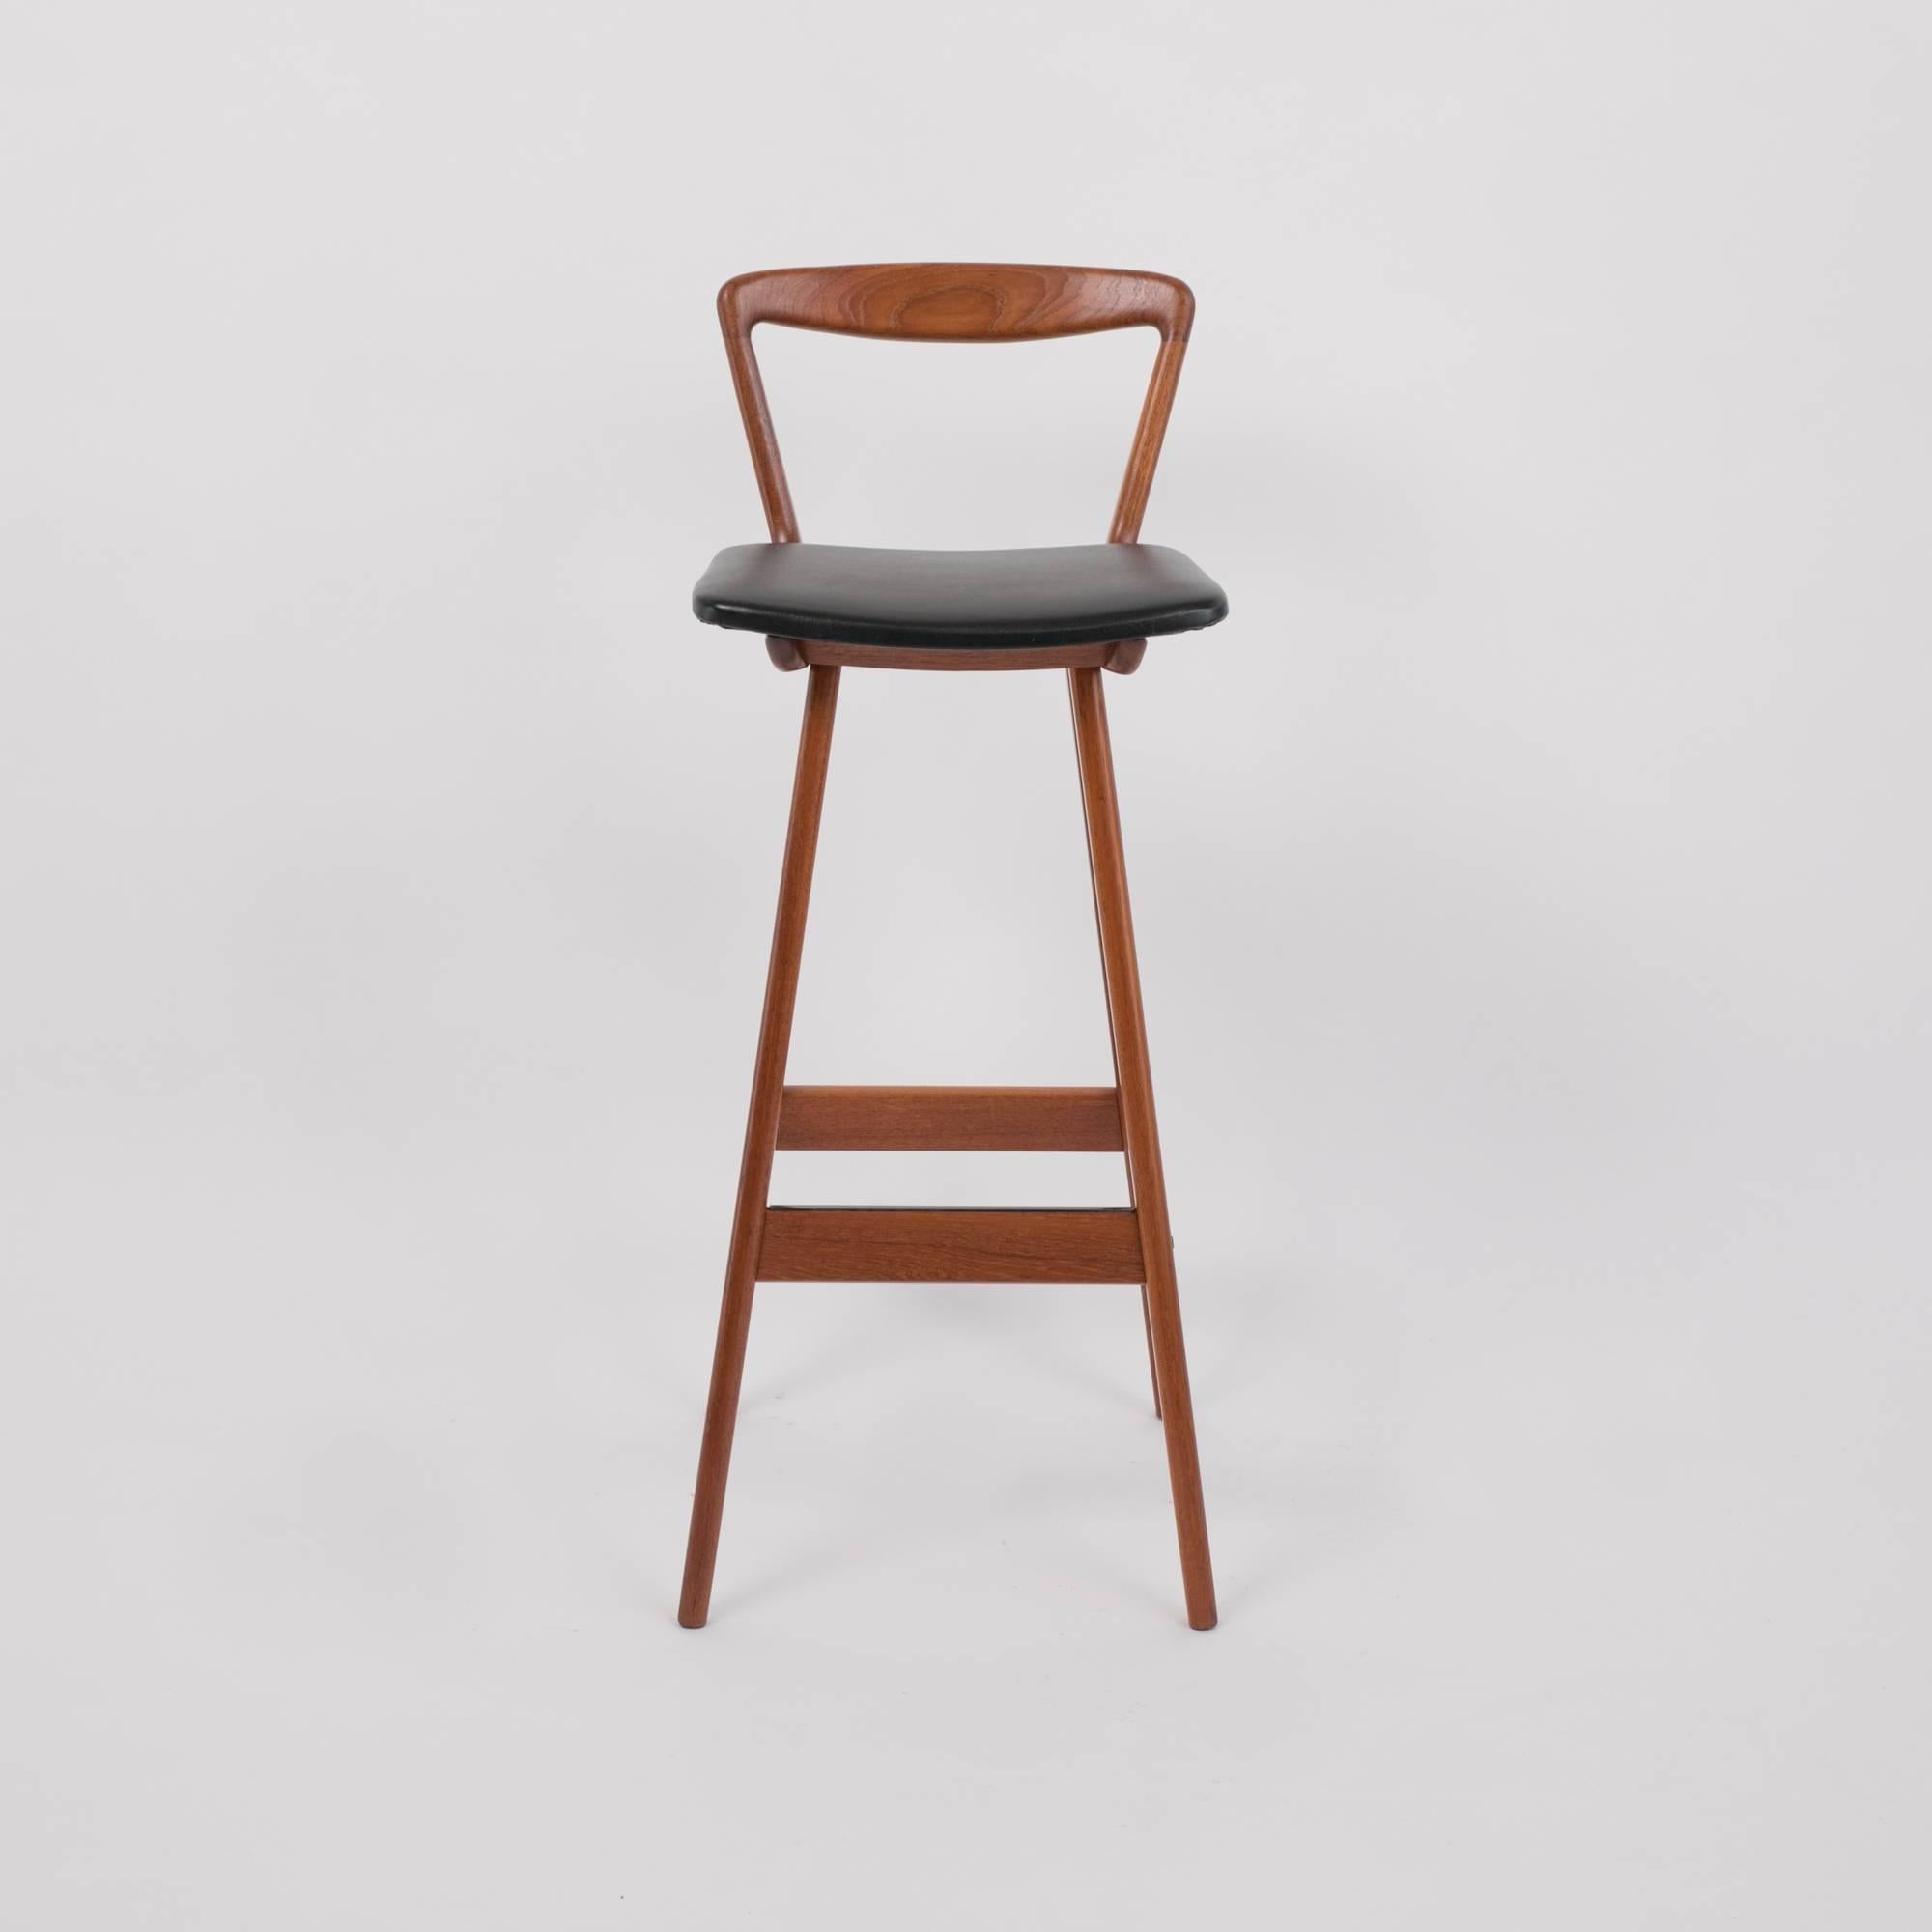 A set of four 1960s bar stools by Henry Rosengren Hansen for Brande Møbelindustri. The stools have their original vinyl-upholstered seats and sit on frames of solid teak. Each stool has flat, tapered legs and an open backrest. The horizontal